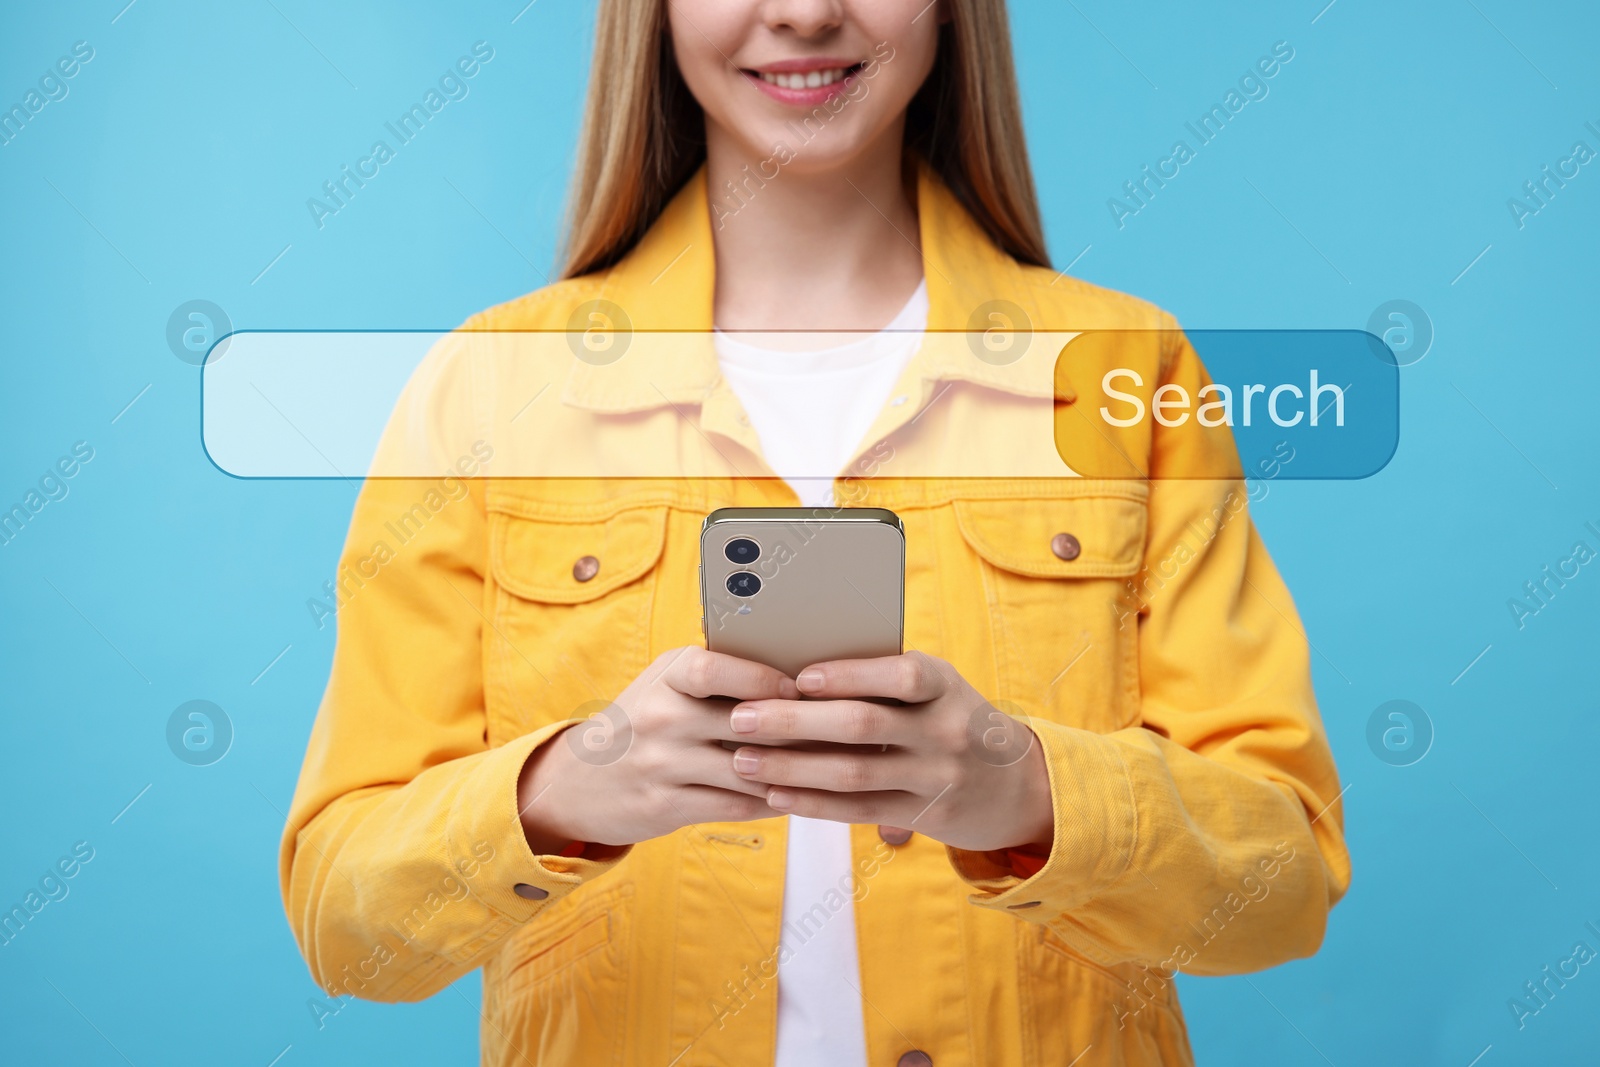 Image of Search bar of website over smartphone. Woman using device on light blue background, closeup